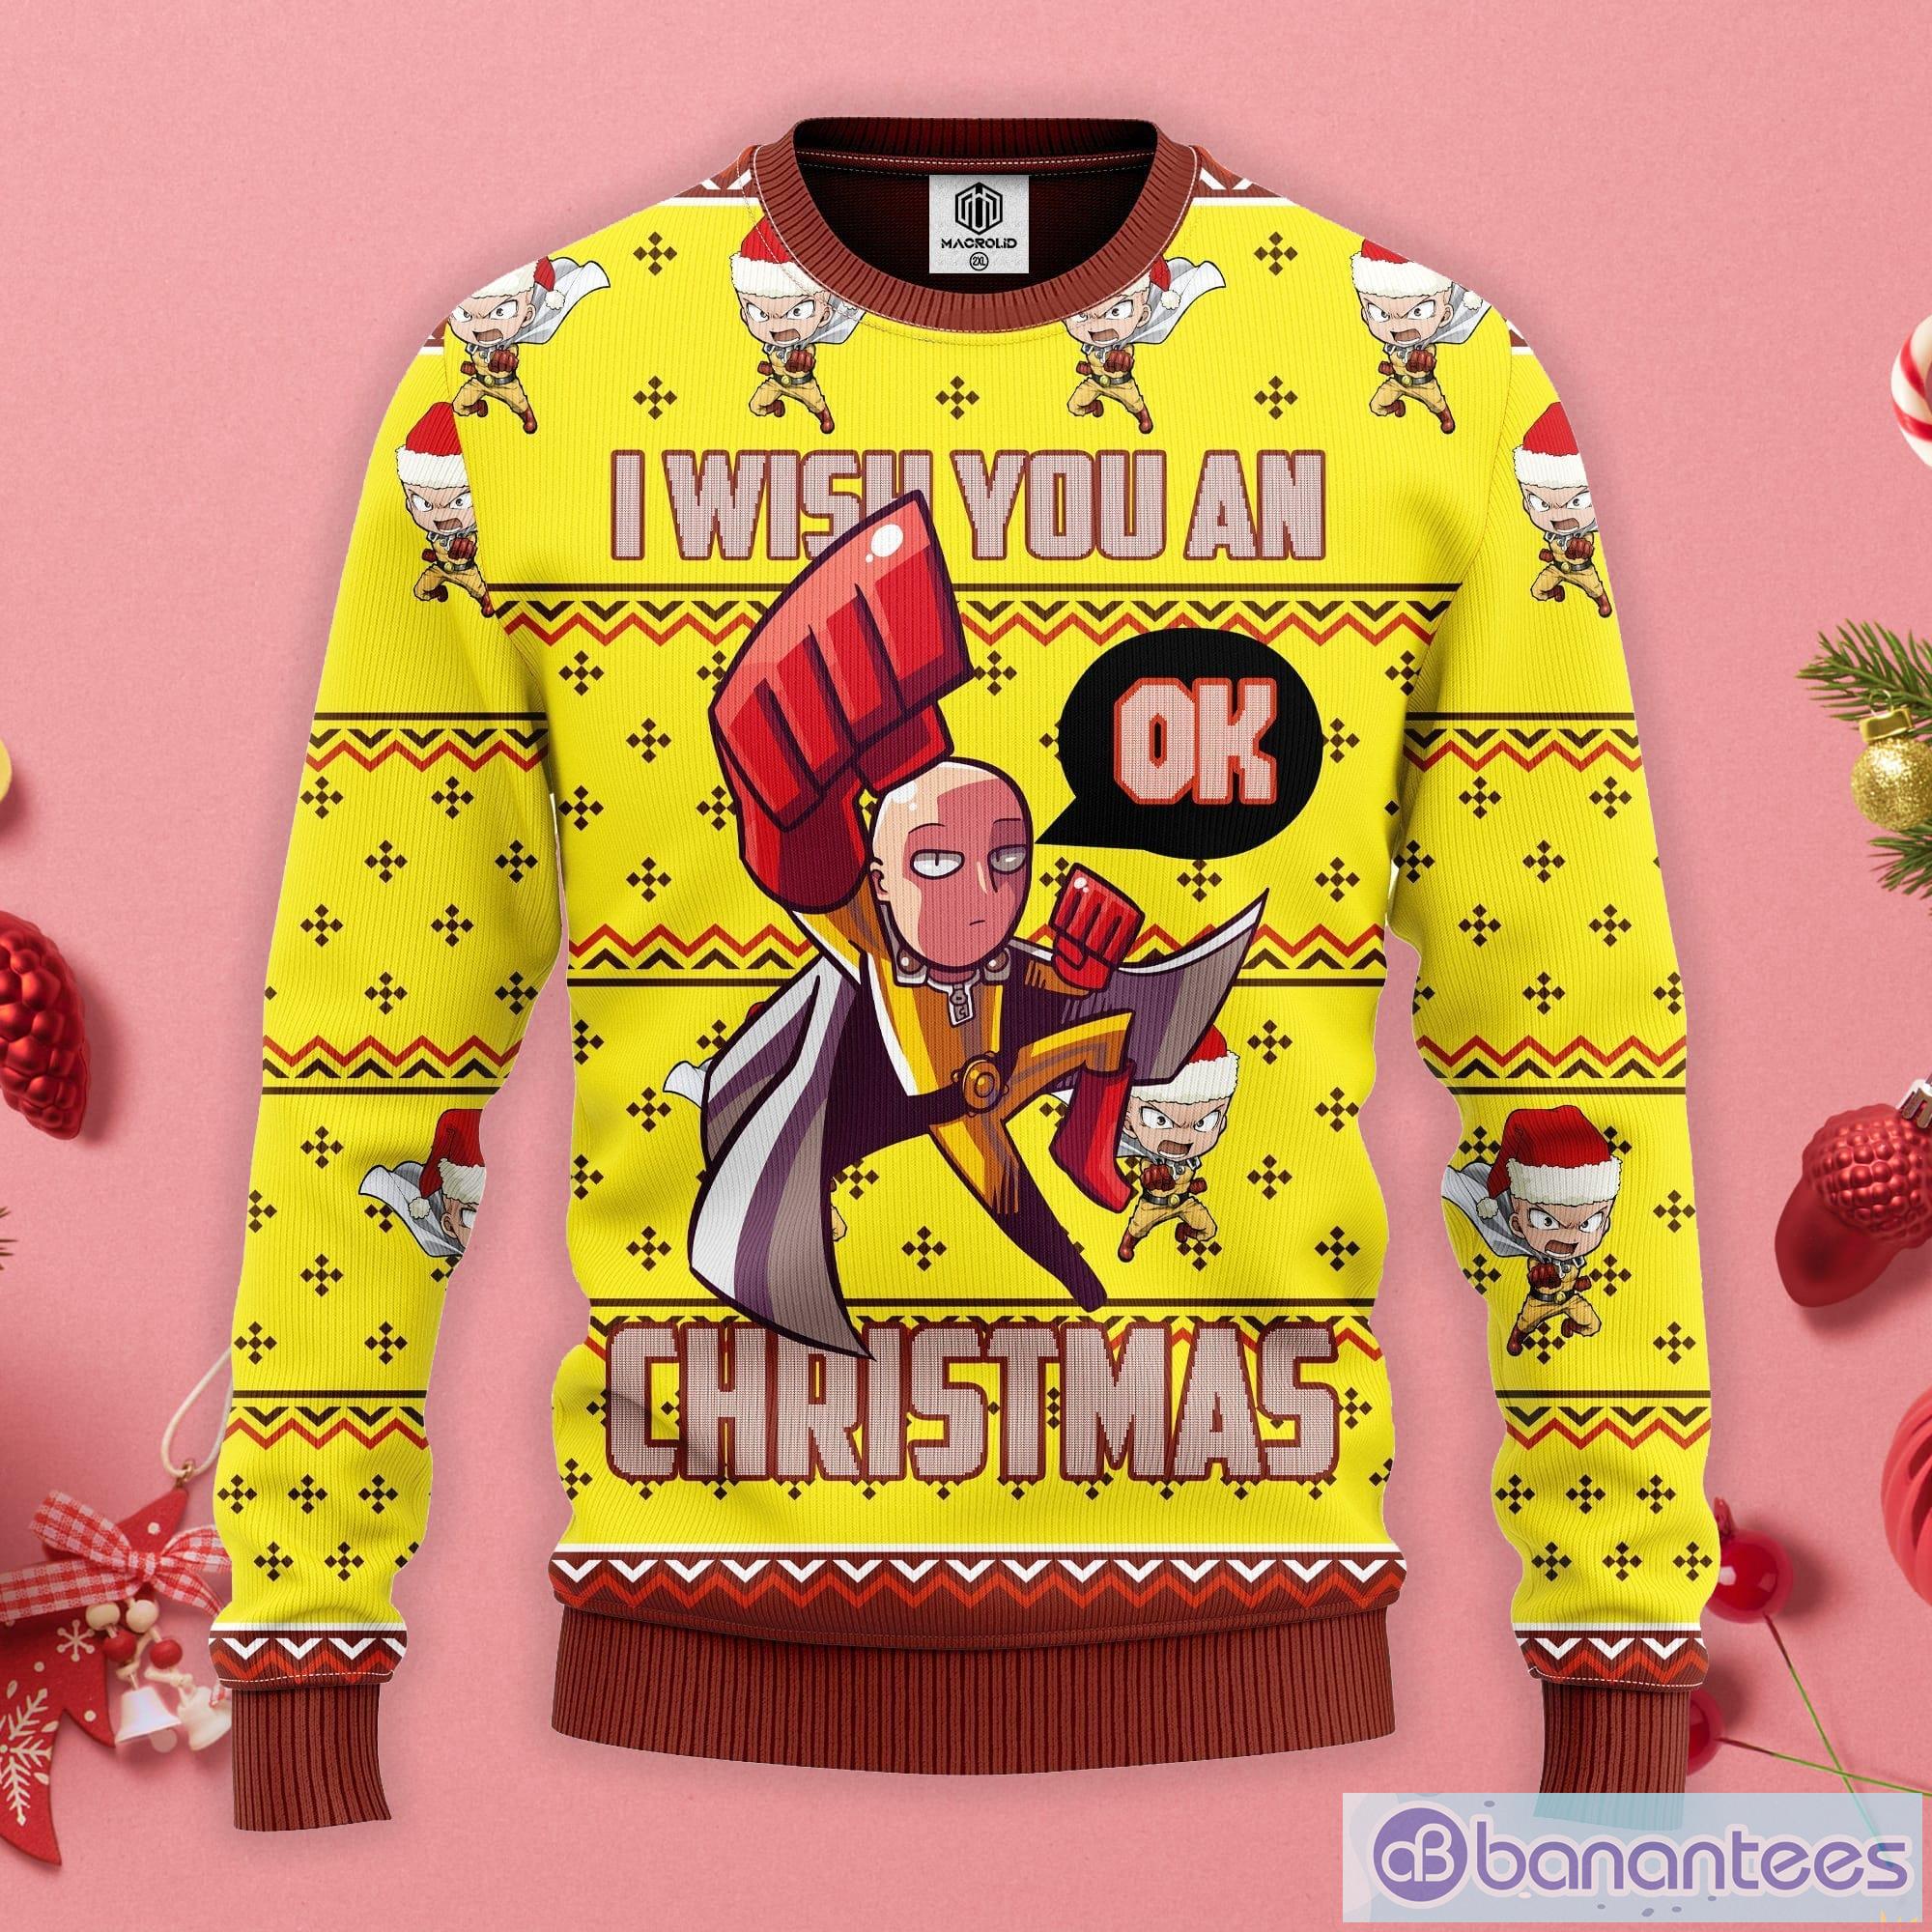 One Punch Man I Wish You An Ok Christmas Ugly Christmas Sweater Product Photo 1